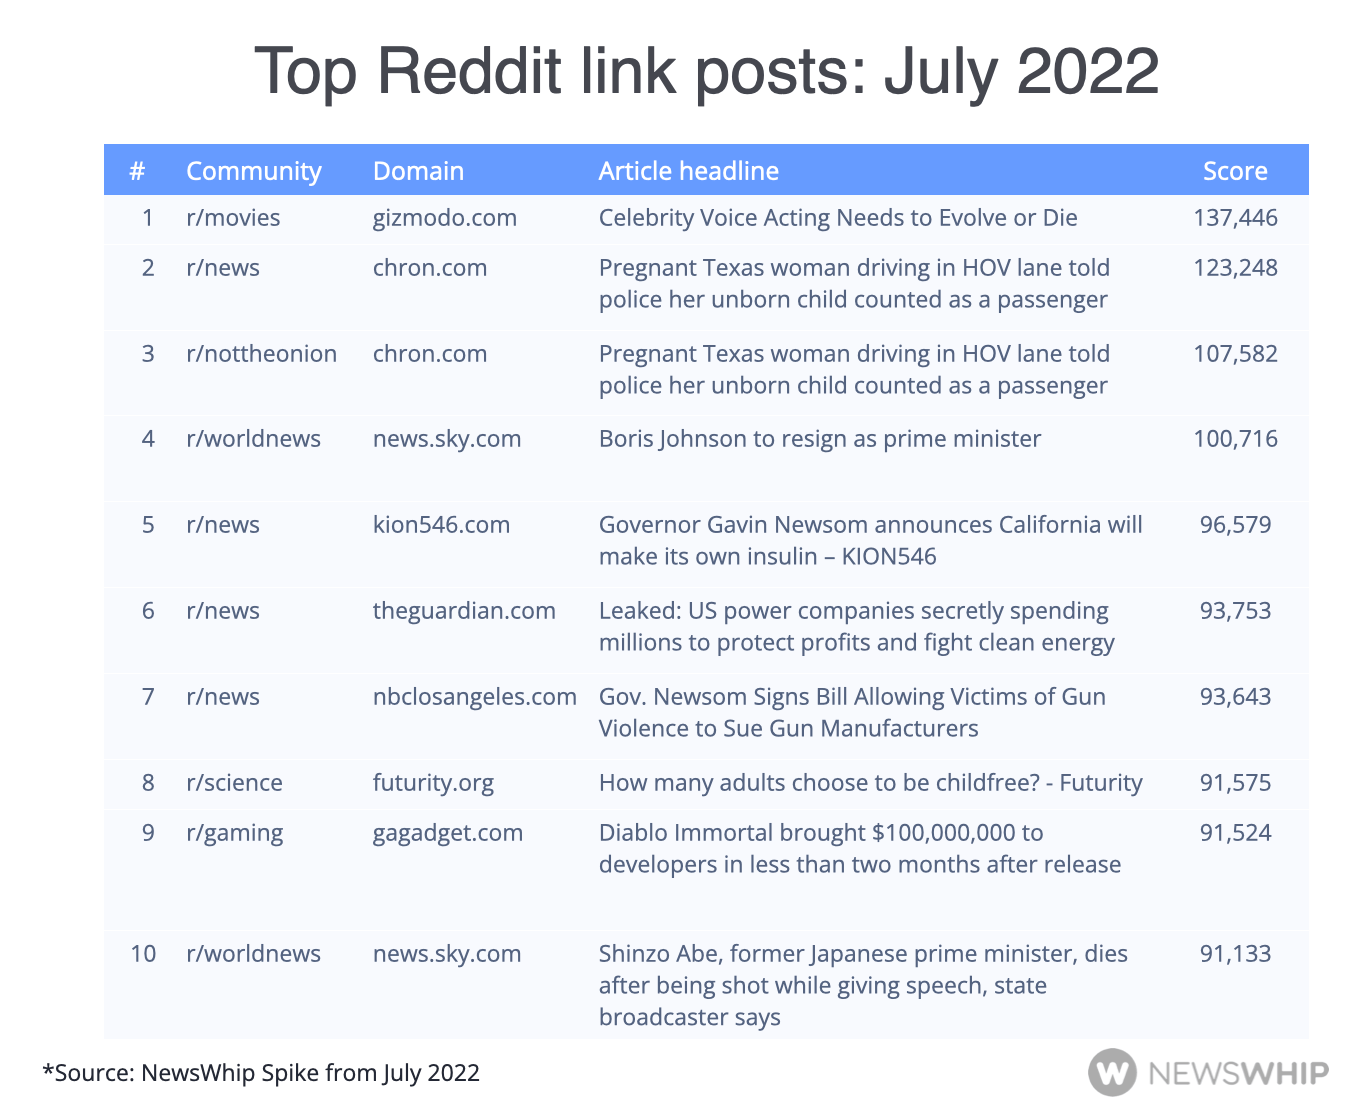 Table showing the top Reddit link posts in July 2022, ranked by score